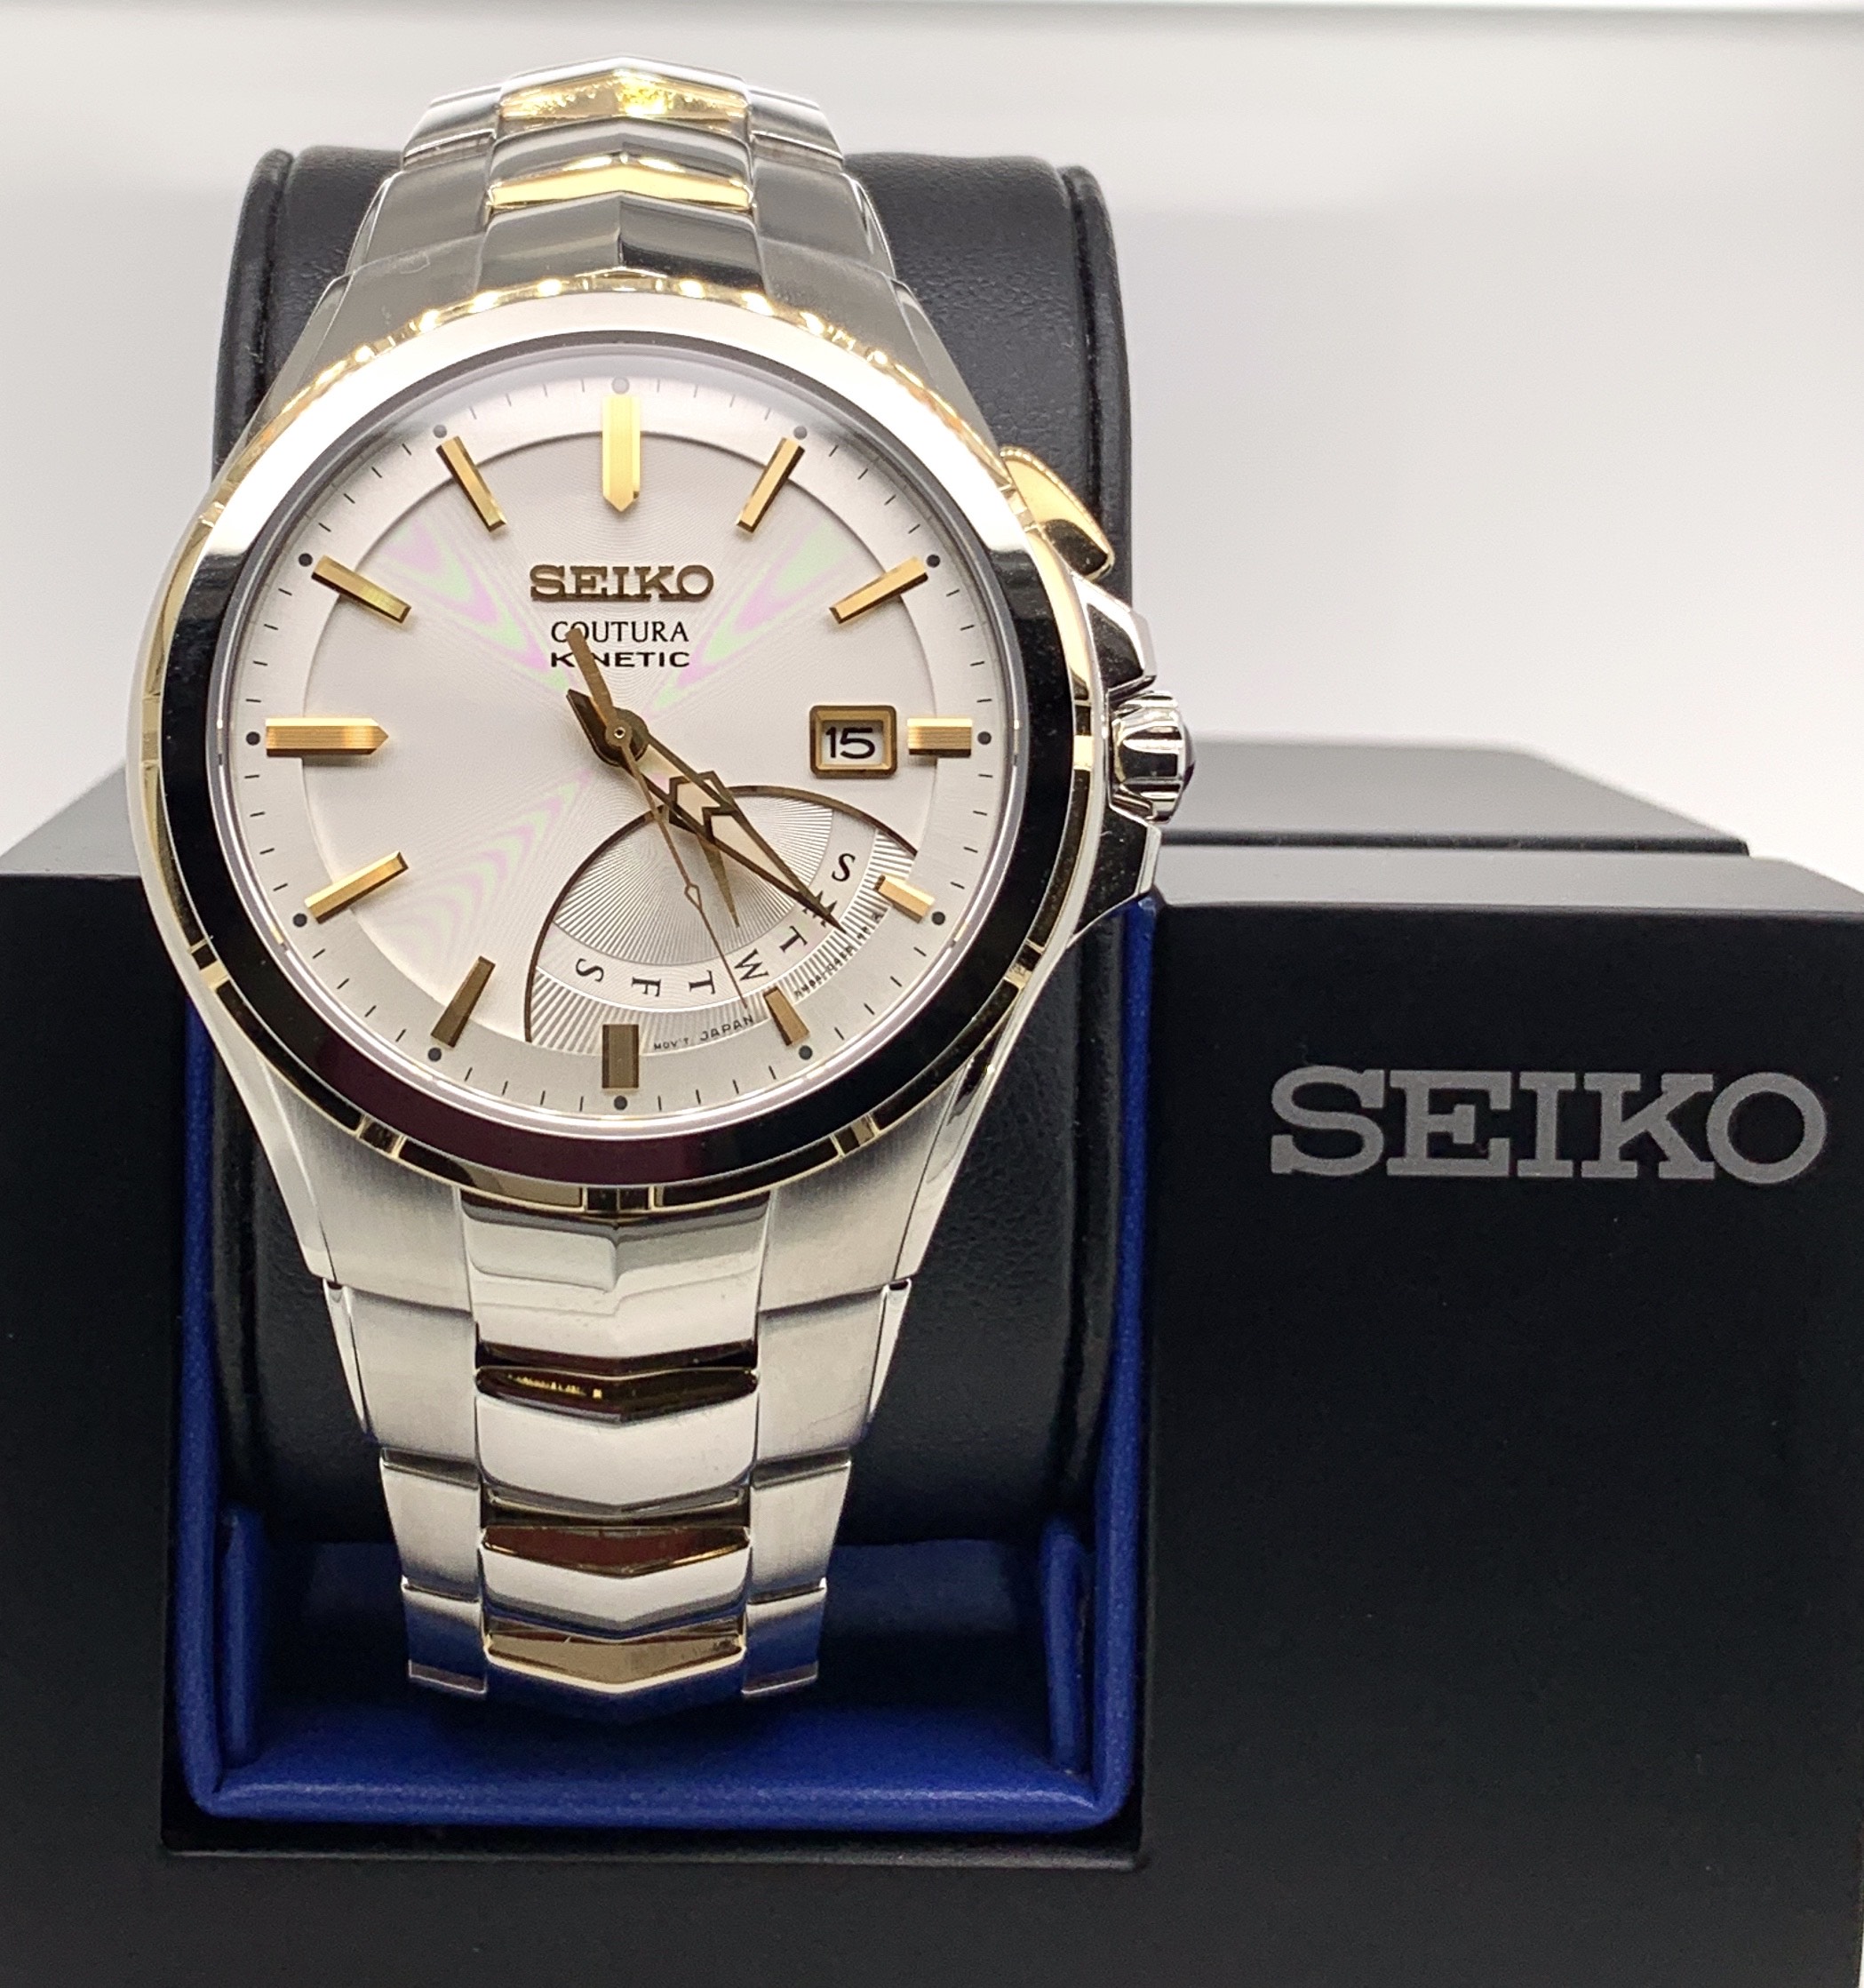 Seiko Coutura Kinetic SRN064 #27 | American Coin and Vault